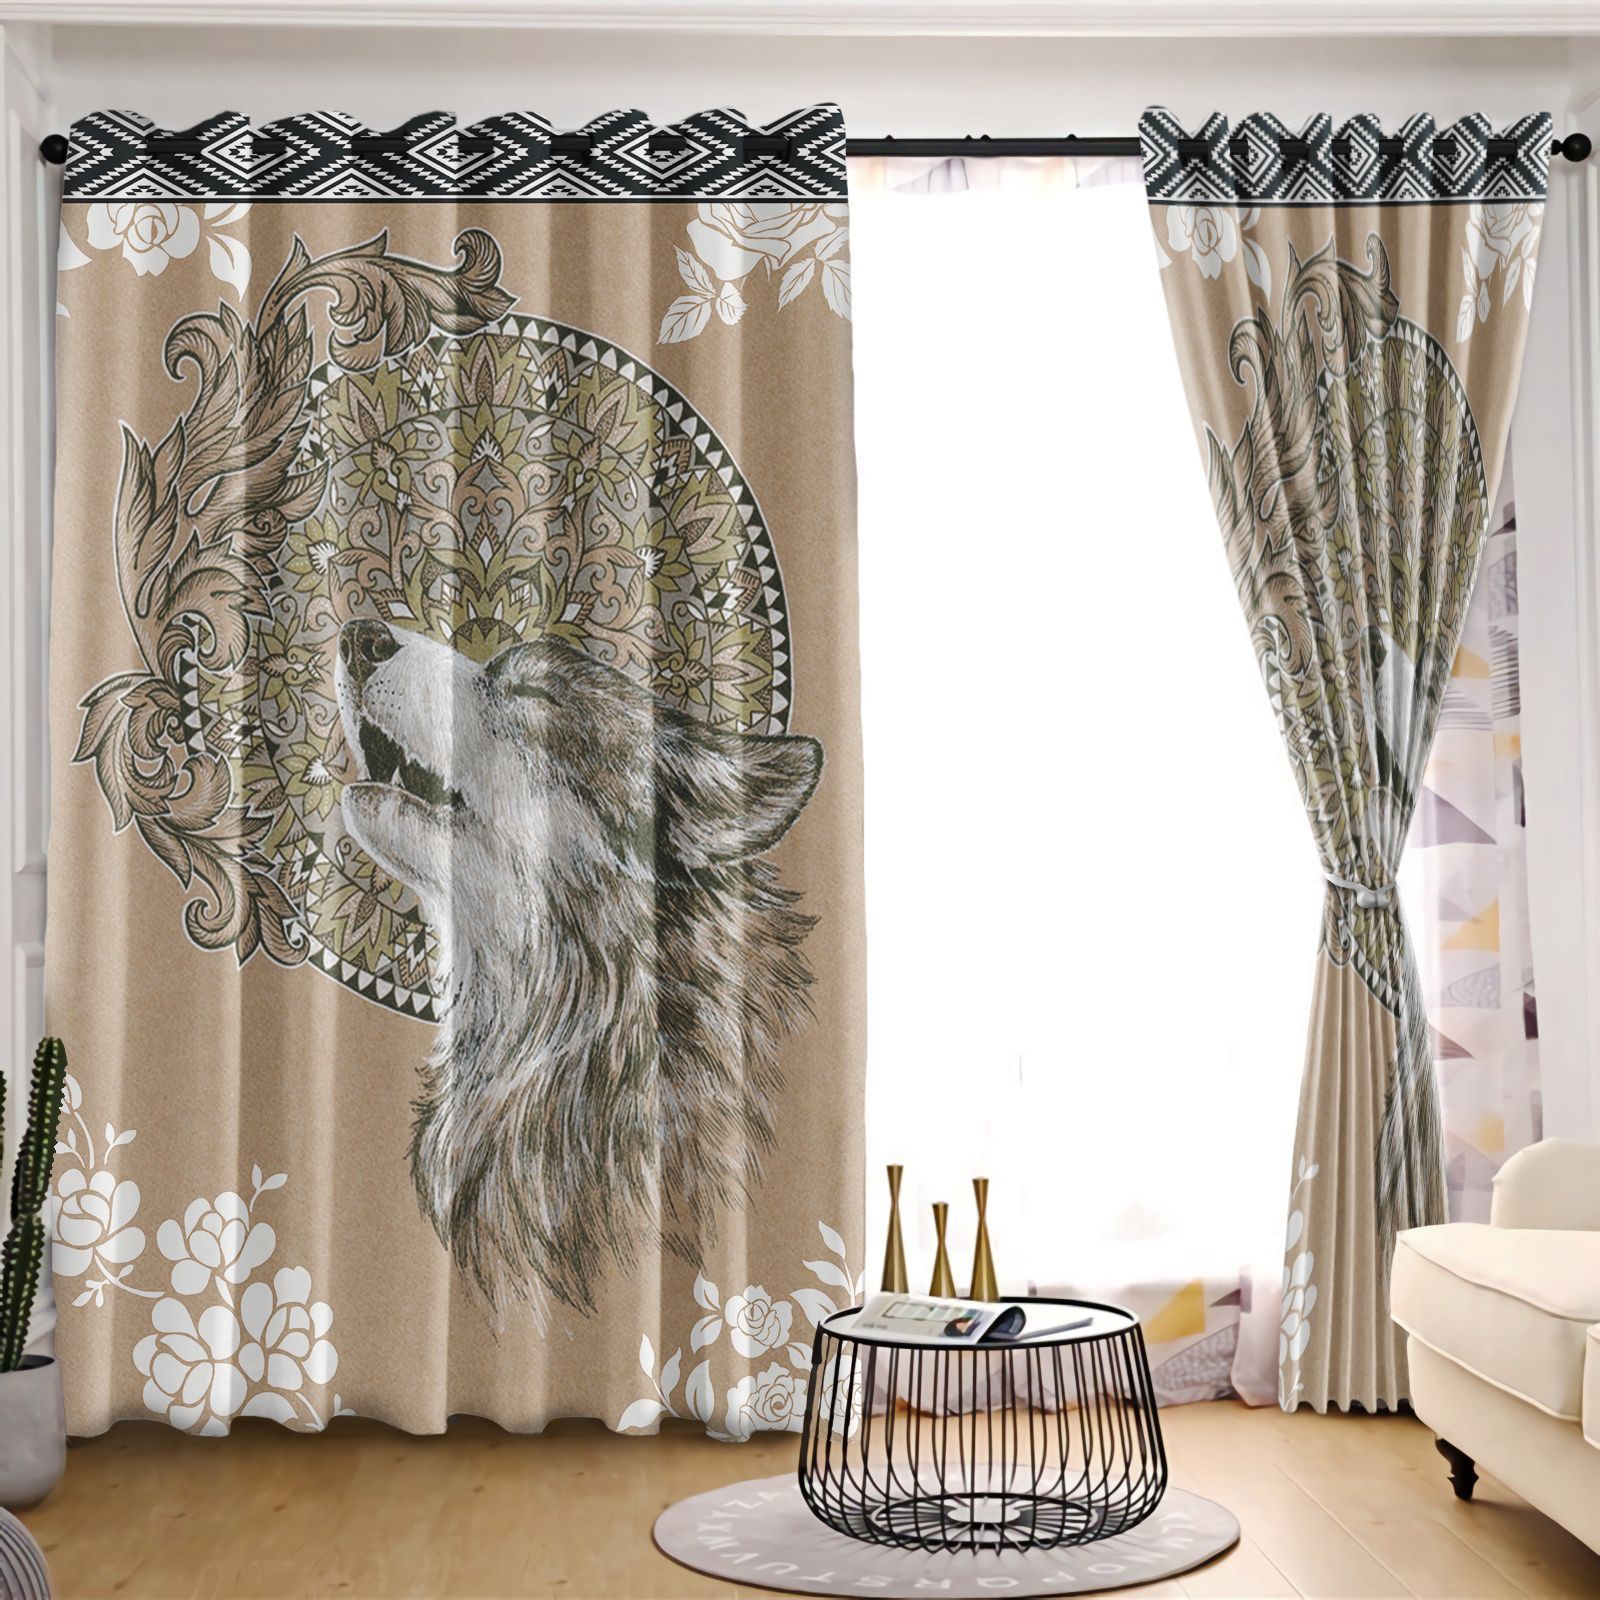 Howling Wolf Paisley Design Taupe Printed Window Curtain Home Decor